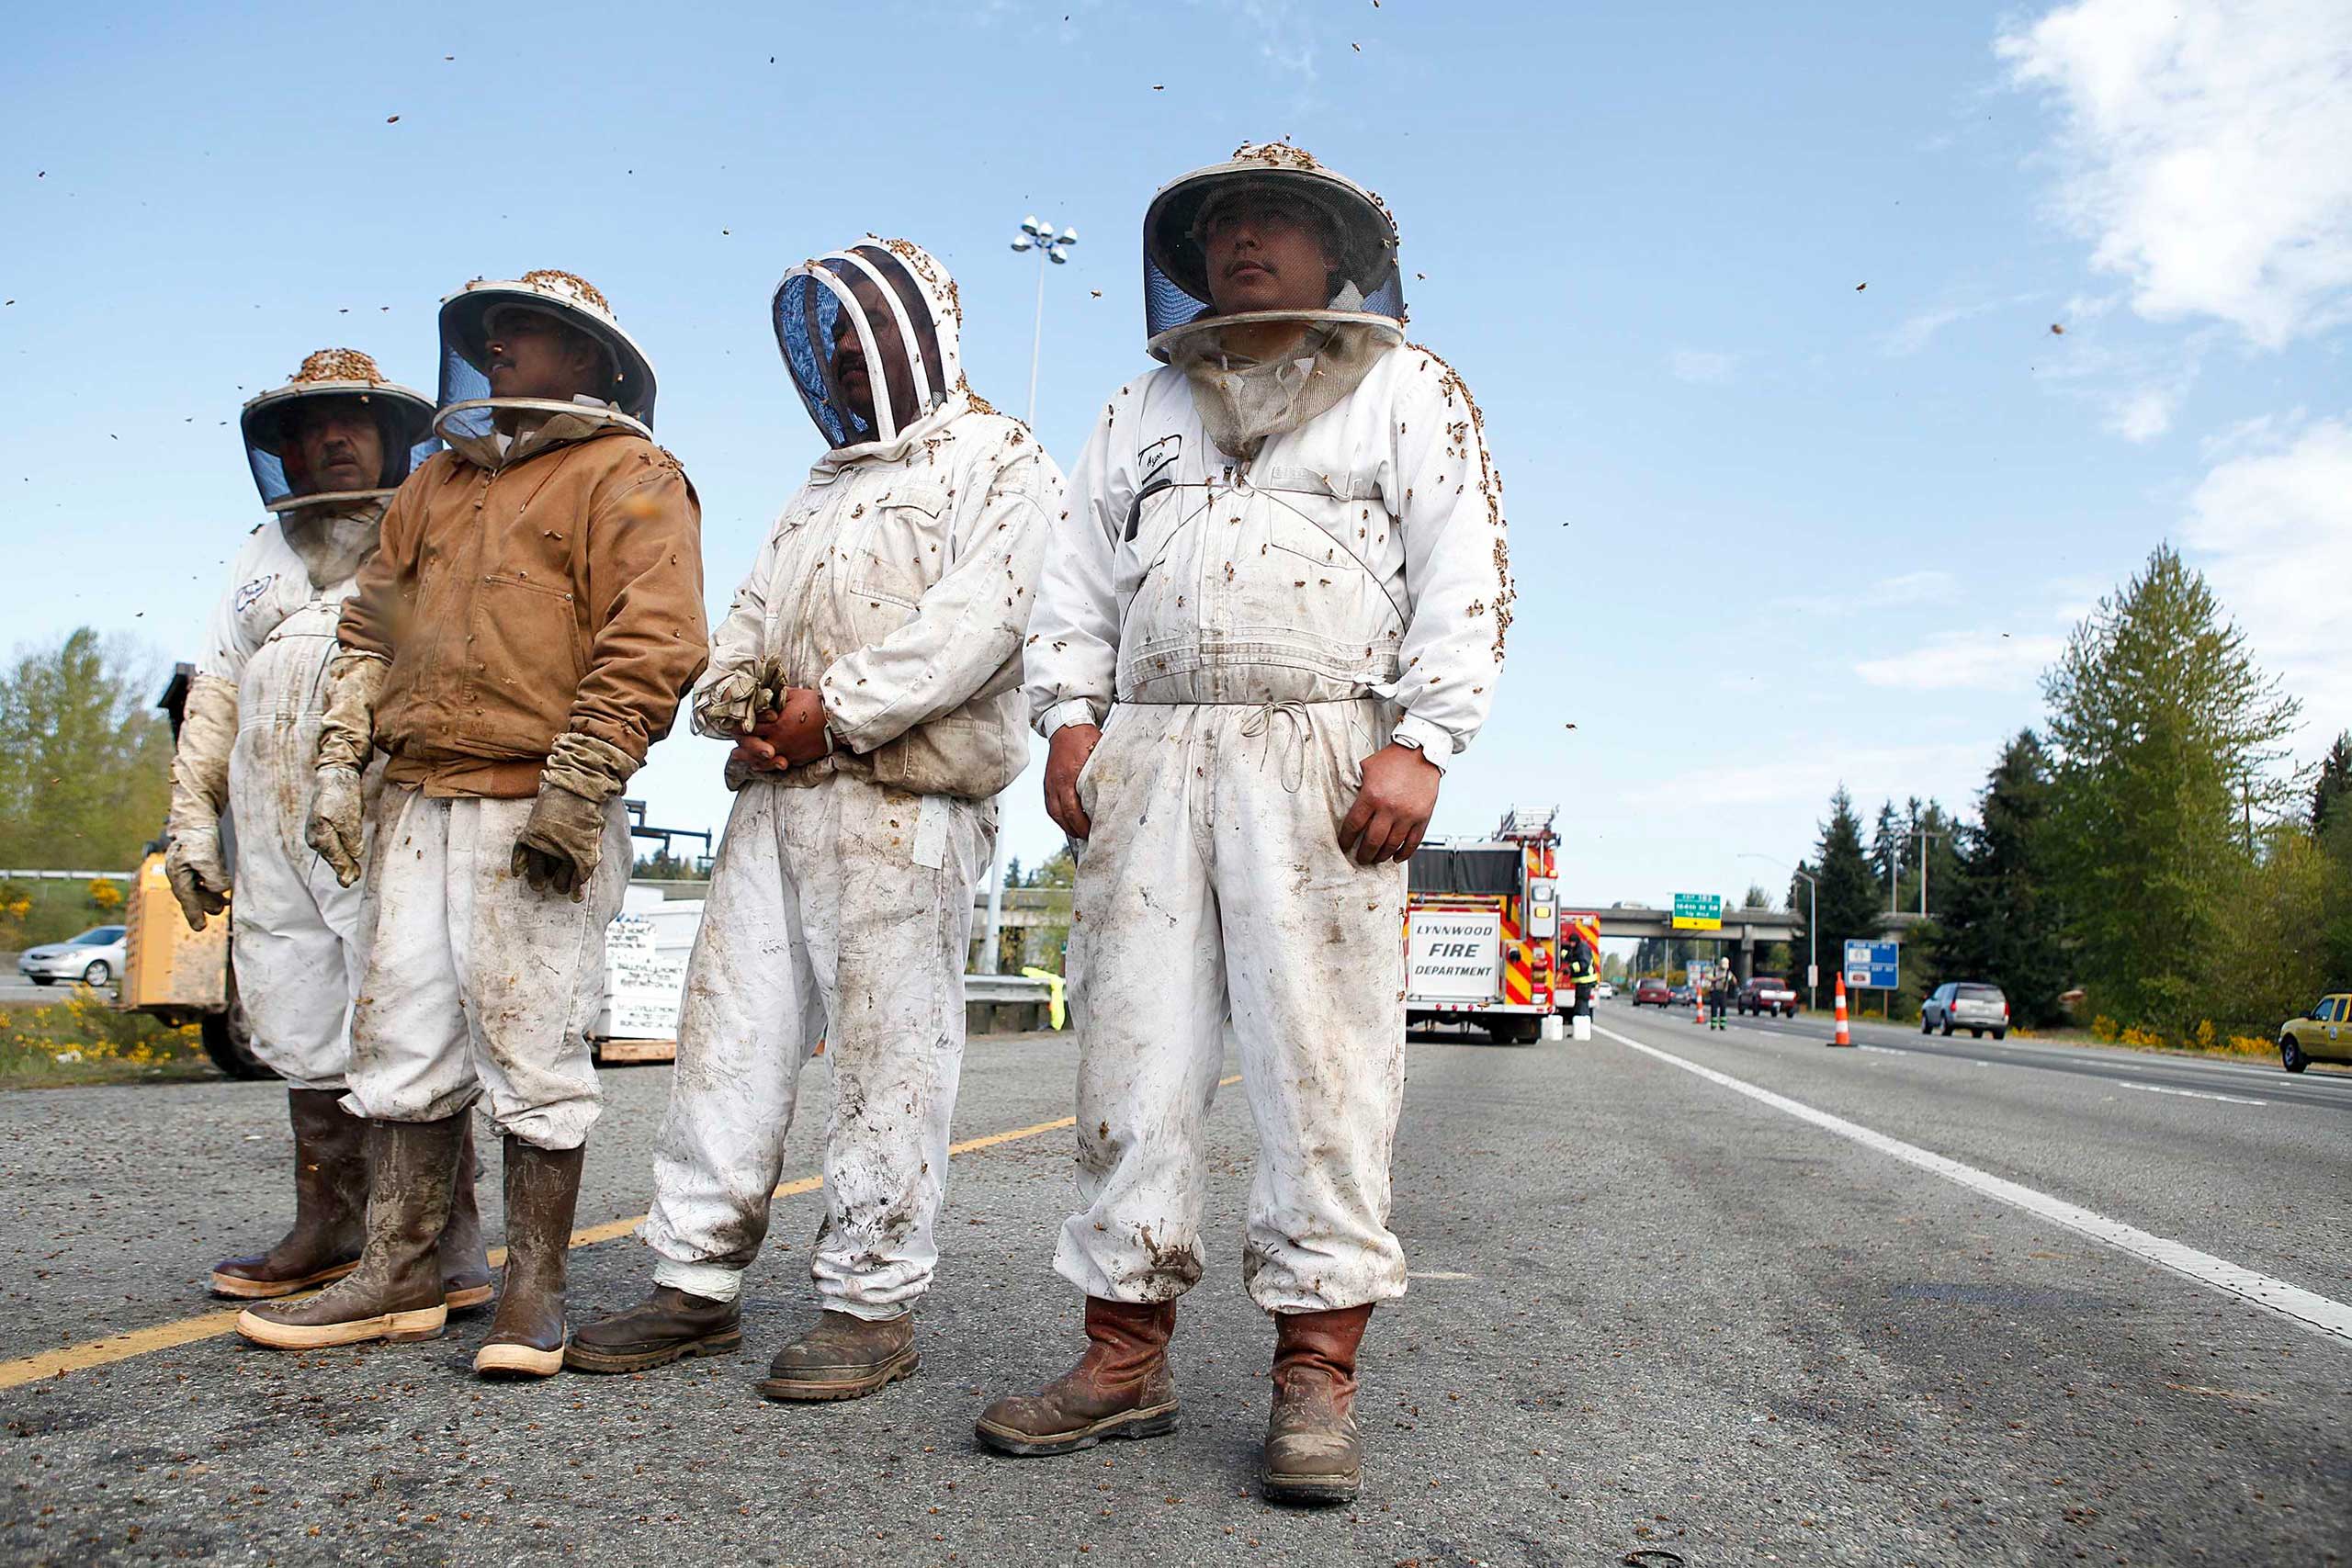 Beekeepers wait to start clearing out the scene of semi-trailer truck that overturned with a cargo of bees on a highway in Lynnwood, Wash., on Apr. 17, 2015. (Ian Terry—Reuters)